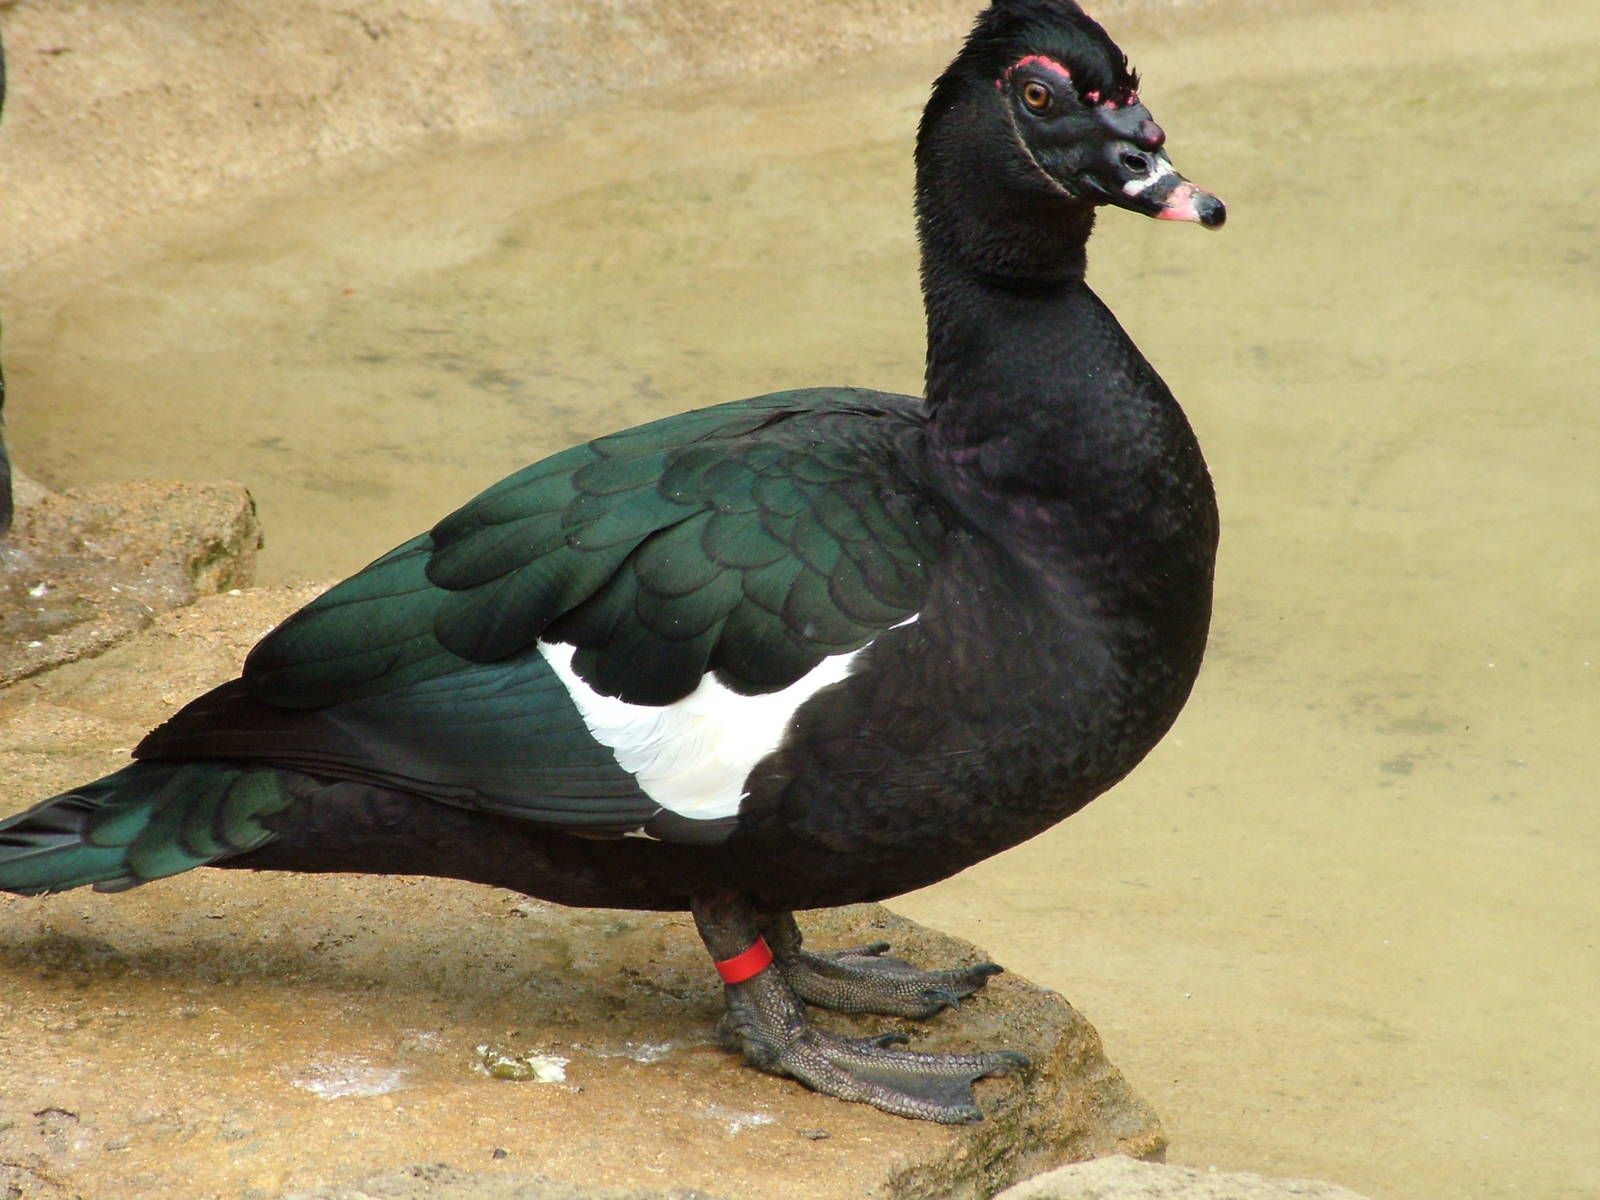 Muscovy male | Muscovy | Pinterest | Muscovy duck and Animal